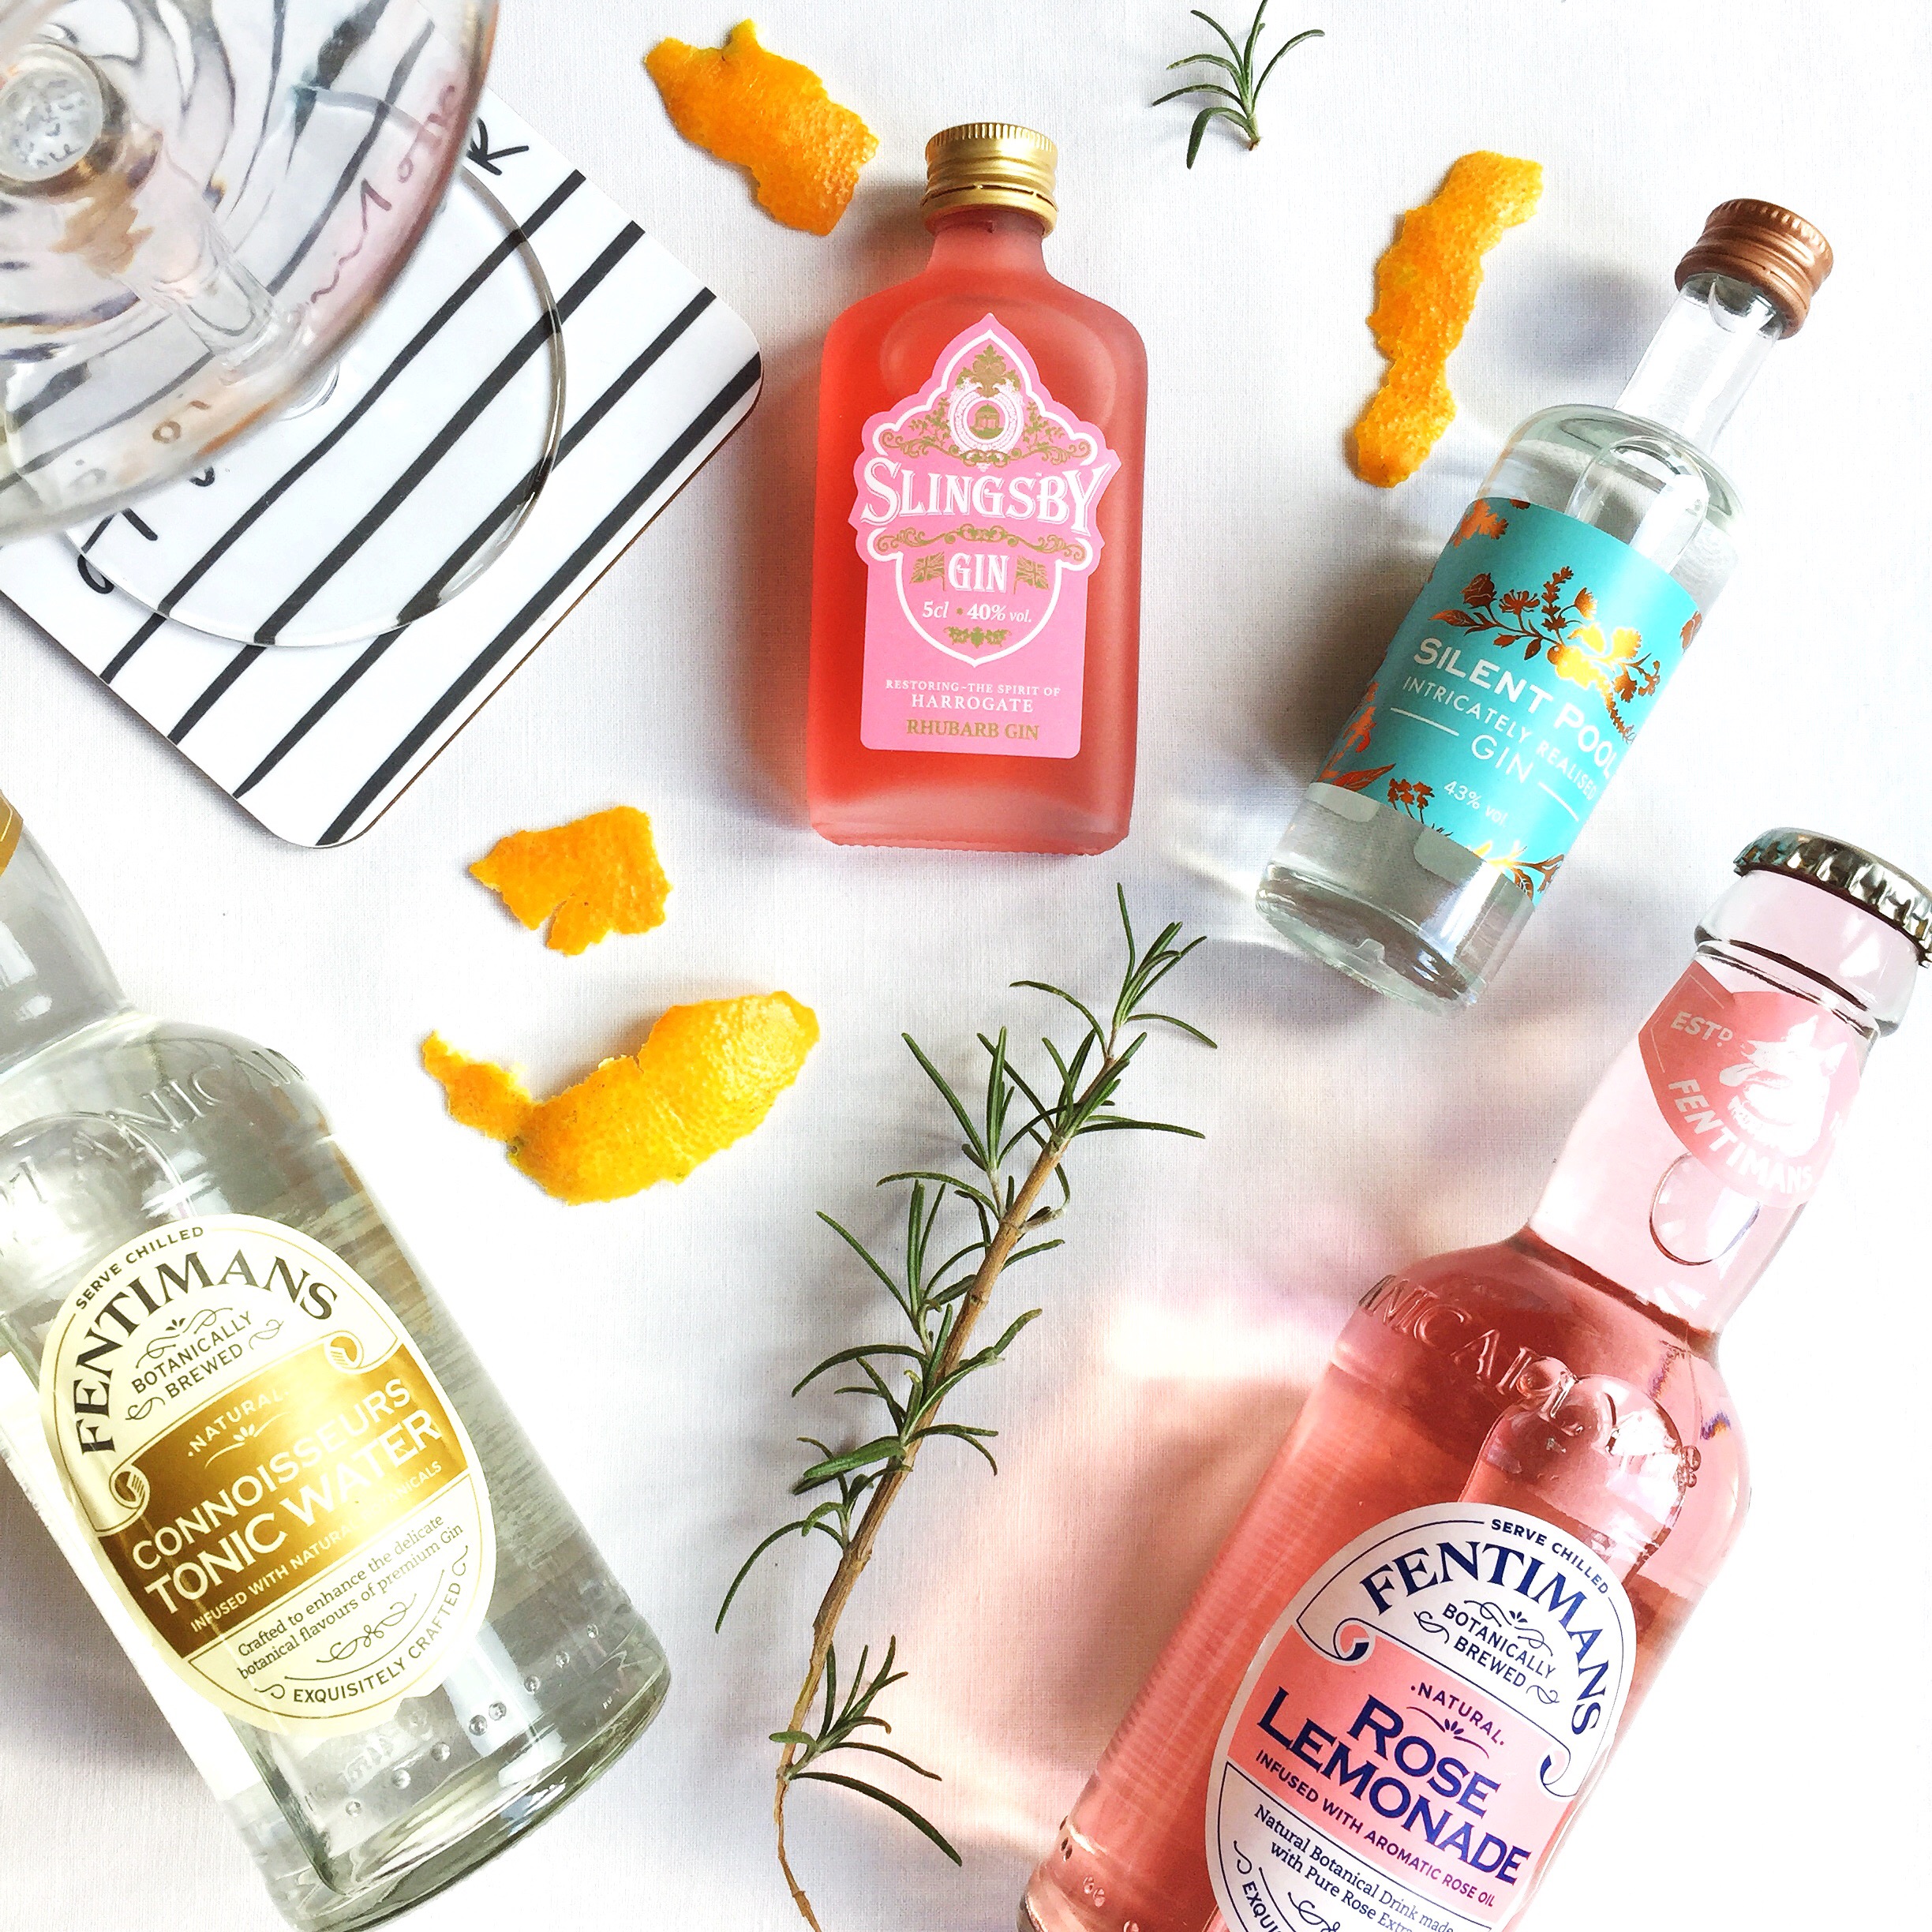 A Gin-credible Gift from I Love Gin